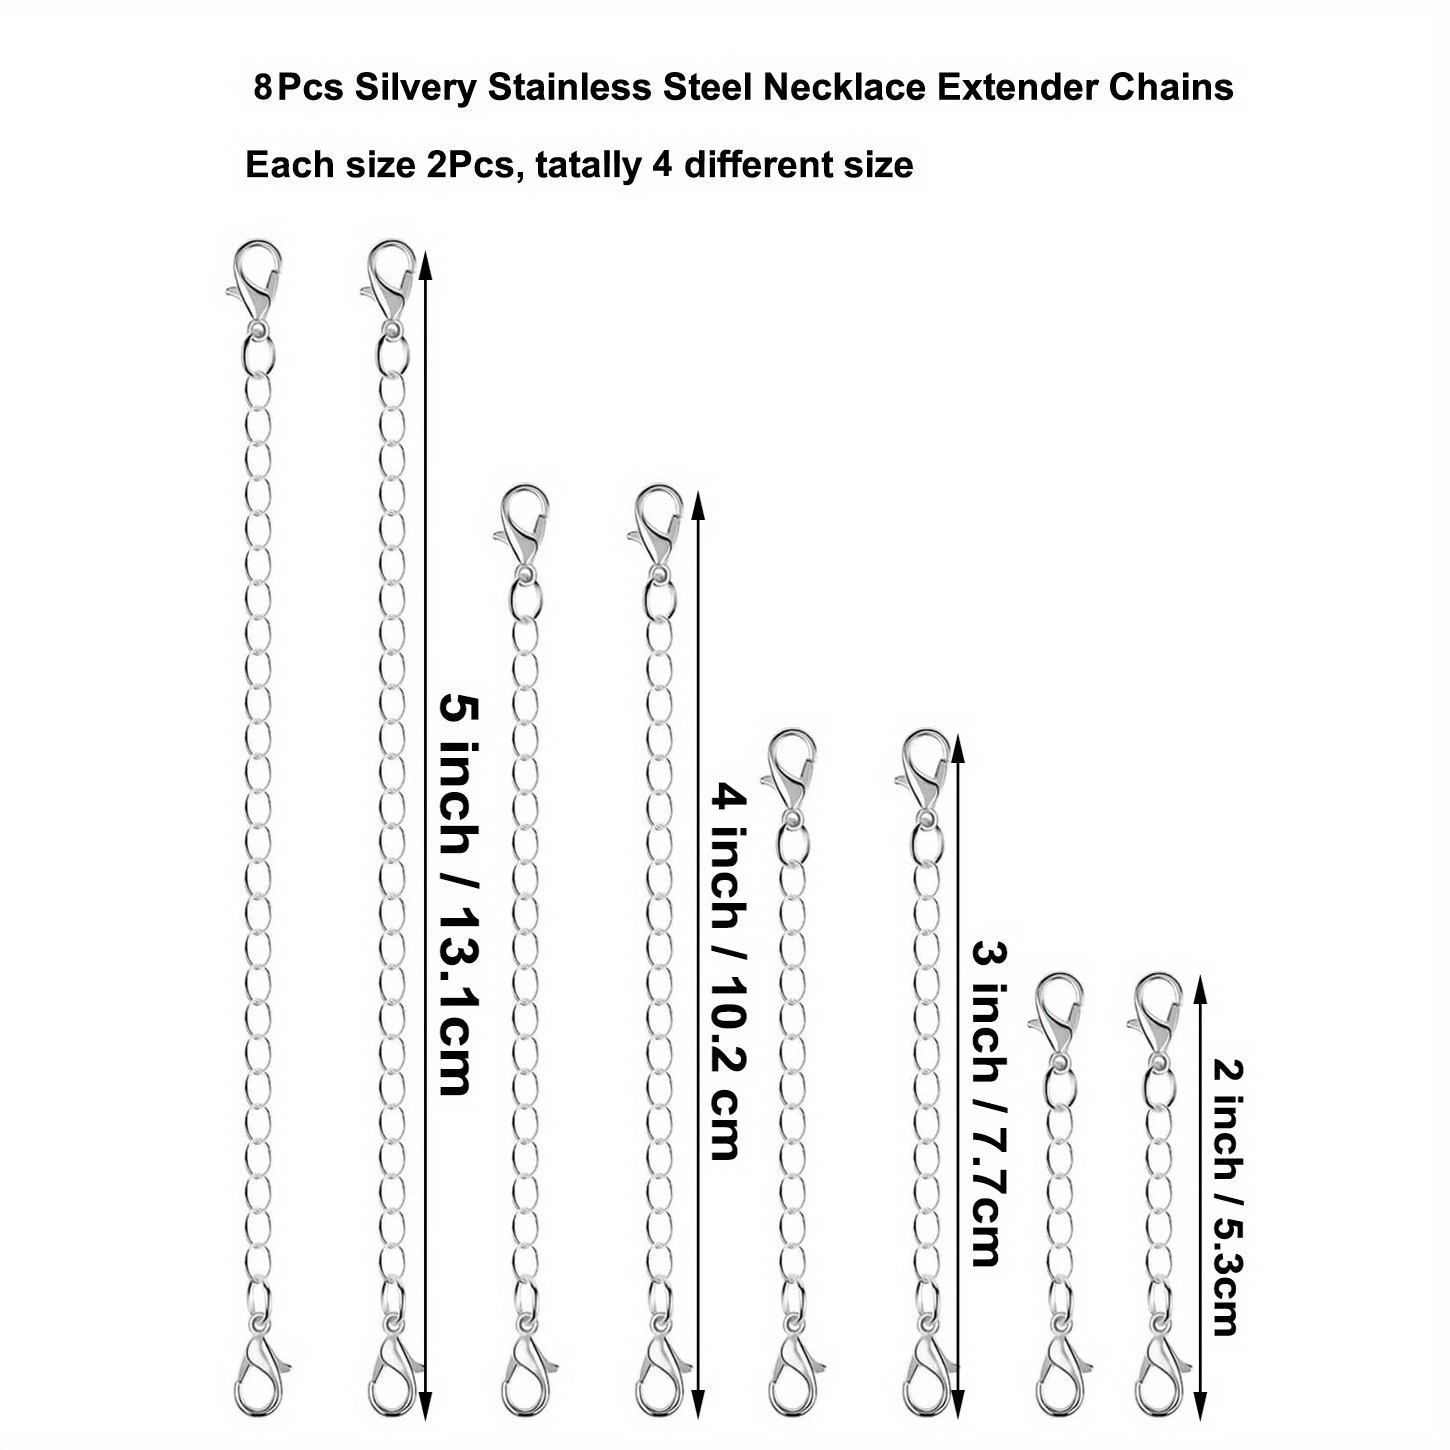 Golden Silvery Stainless Steel Necklace Extenders Chain Jewelry